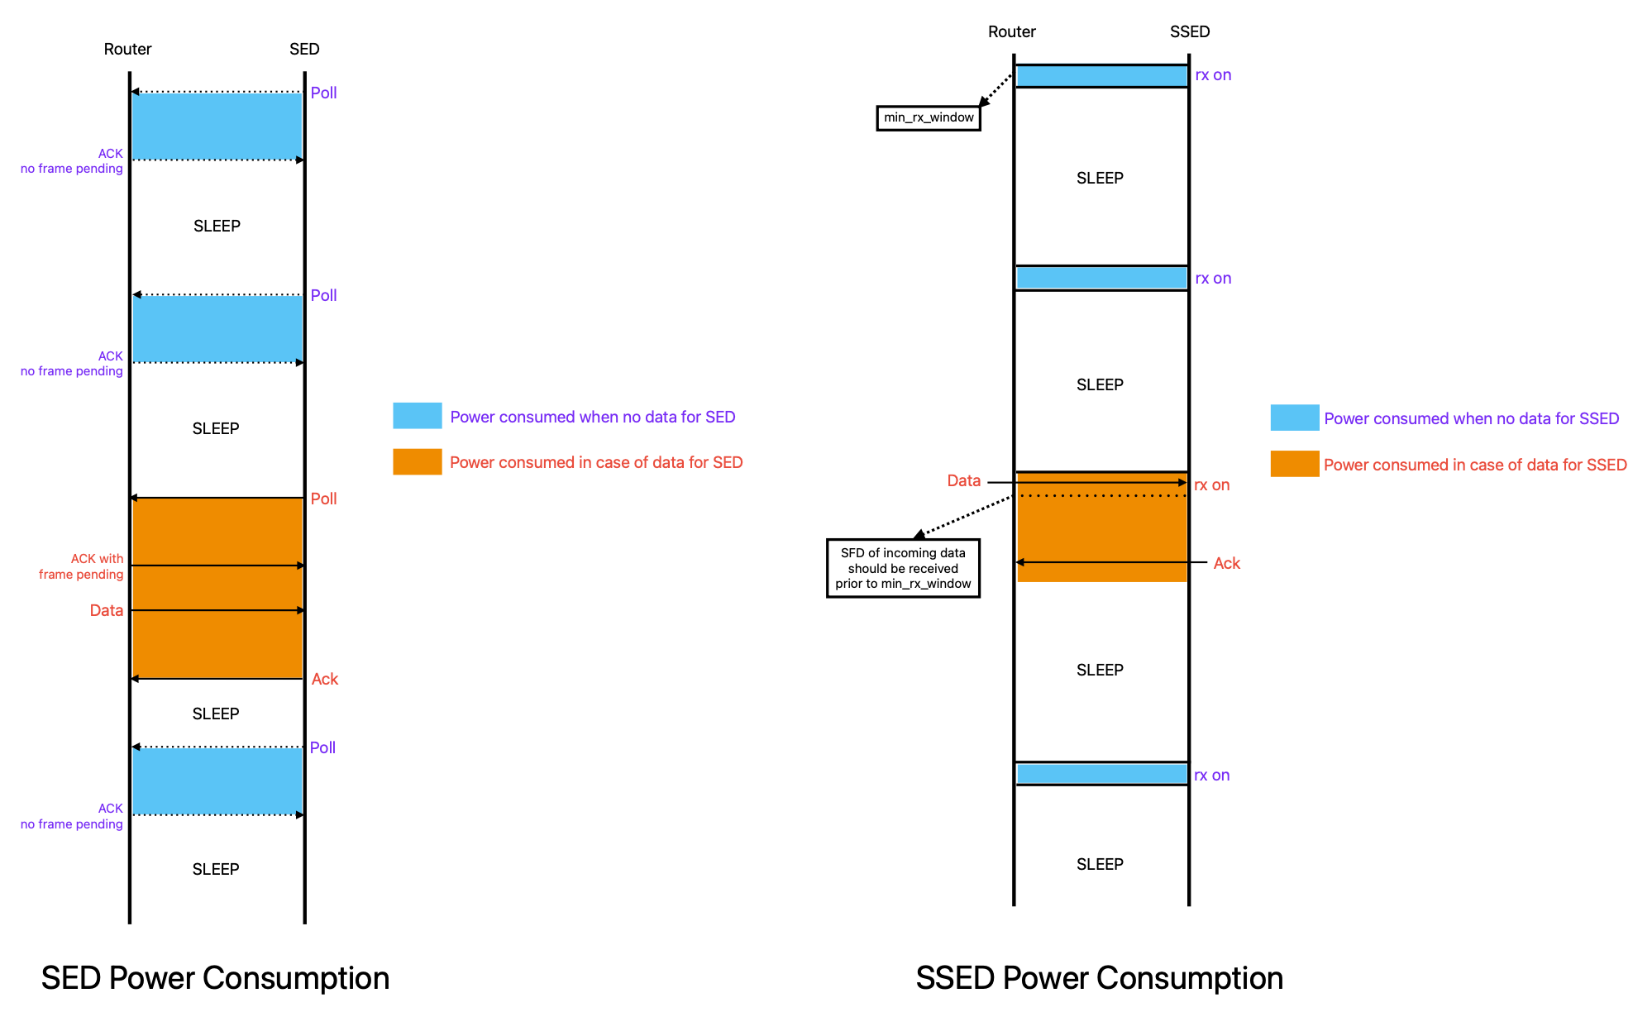 Figure 1.2. Comparison of SED and SSED Power Consumption